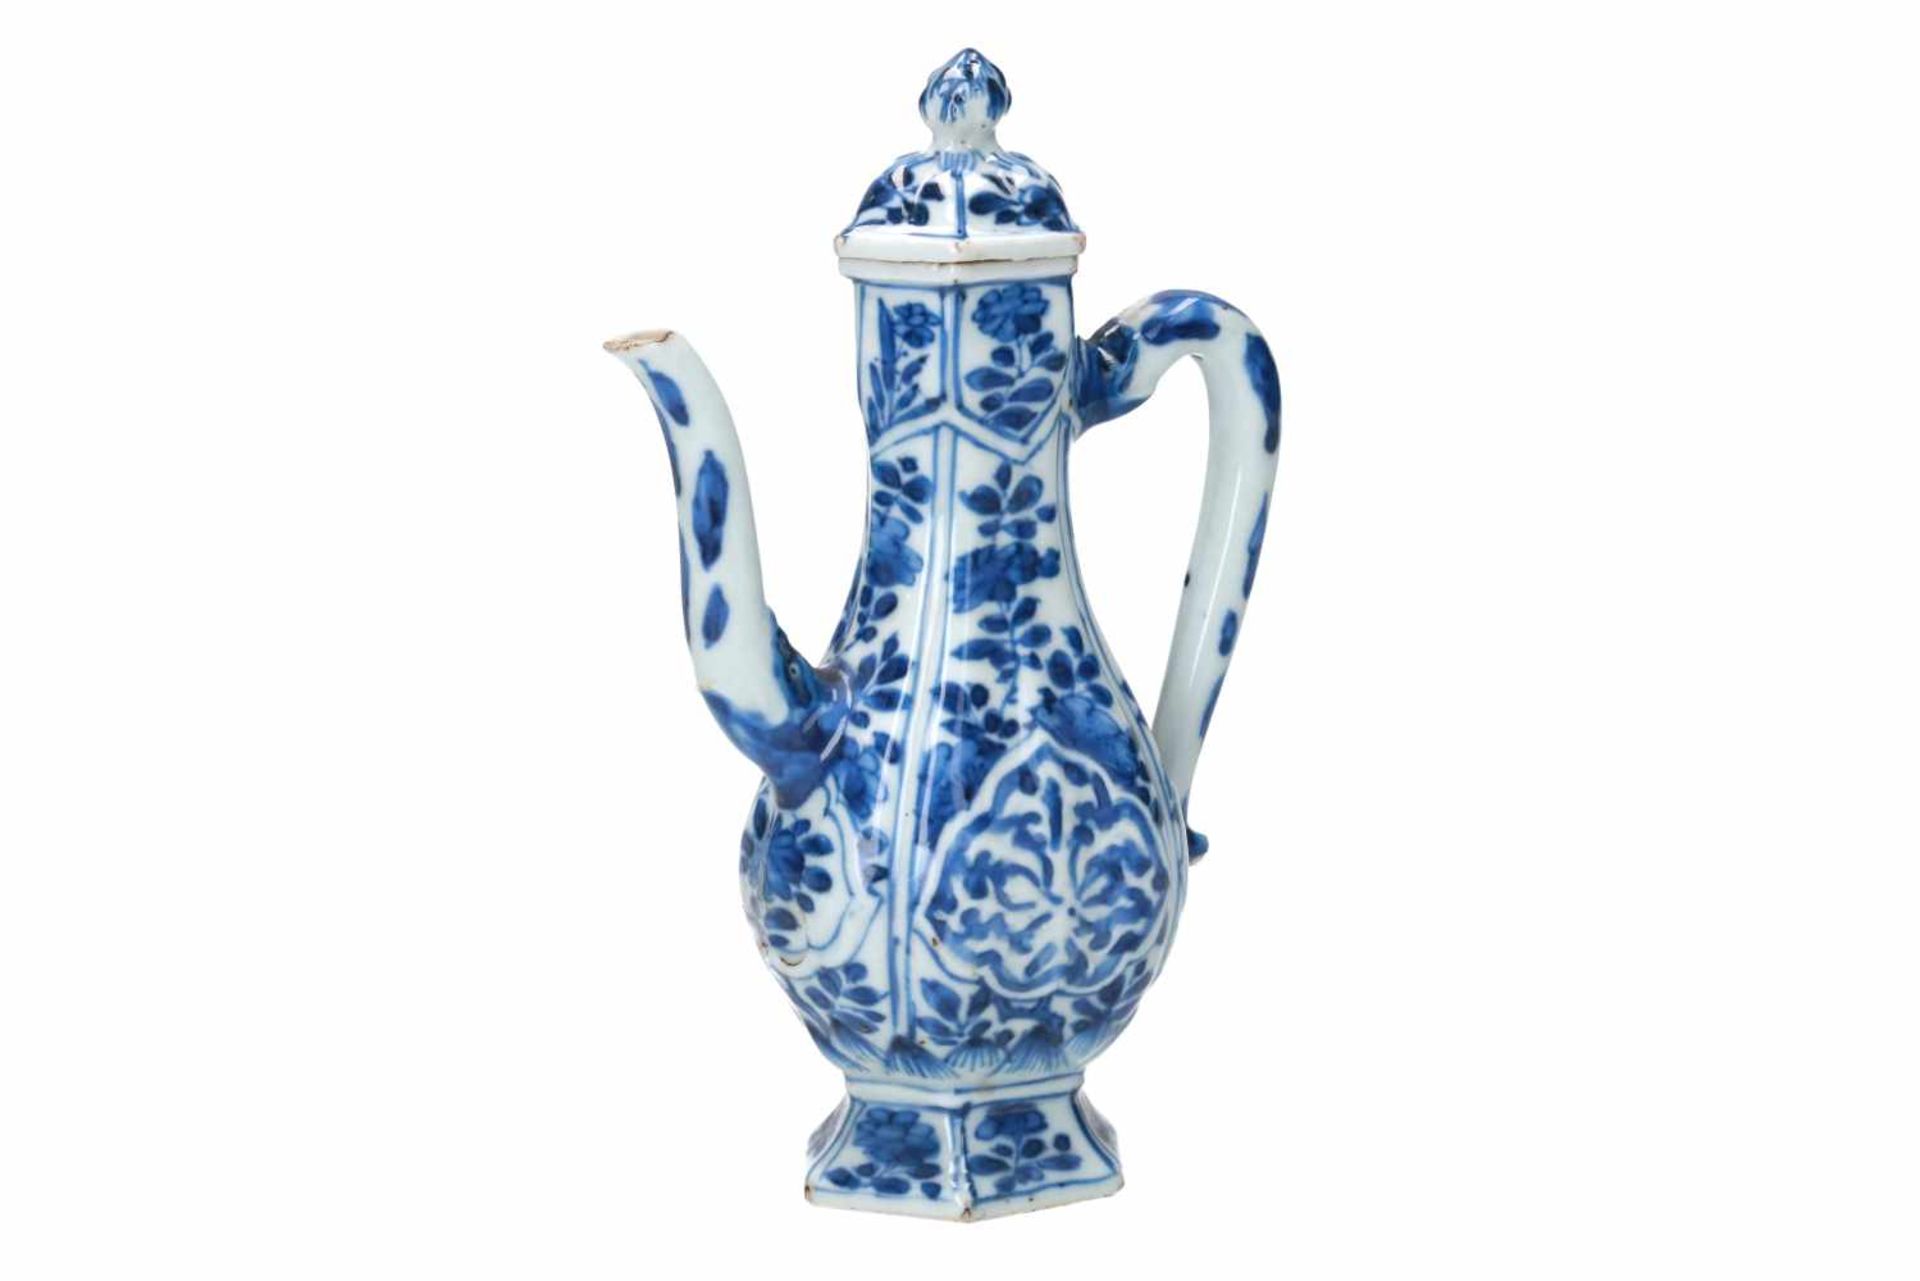 A hexagonal blue and white porcelain wine jar for the Persian market, decorated with flowers and a